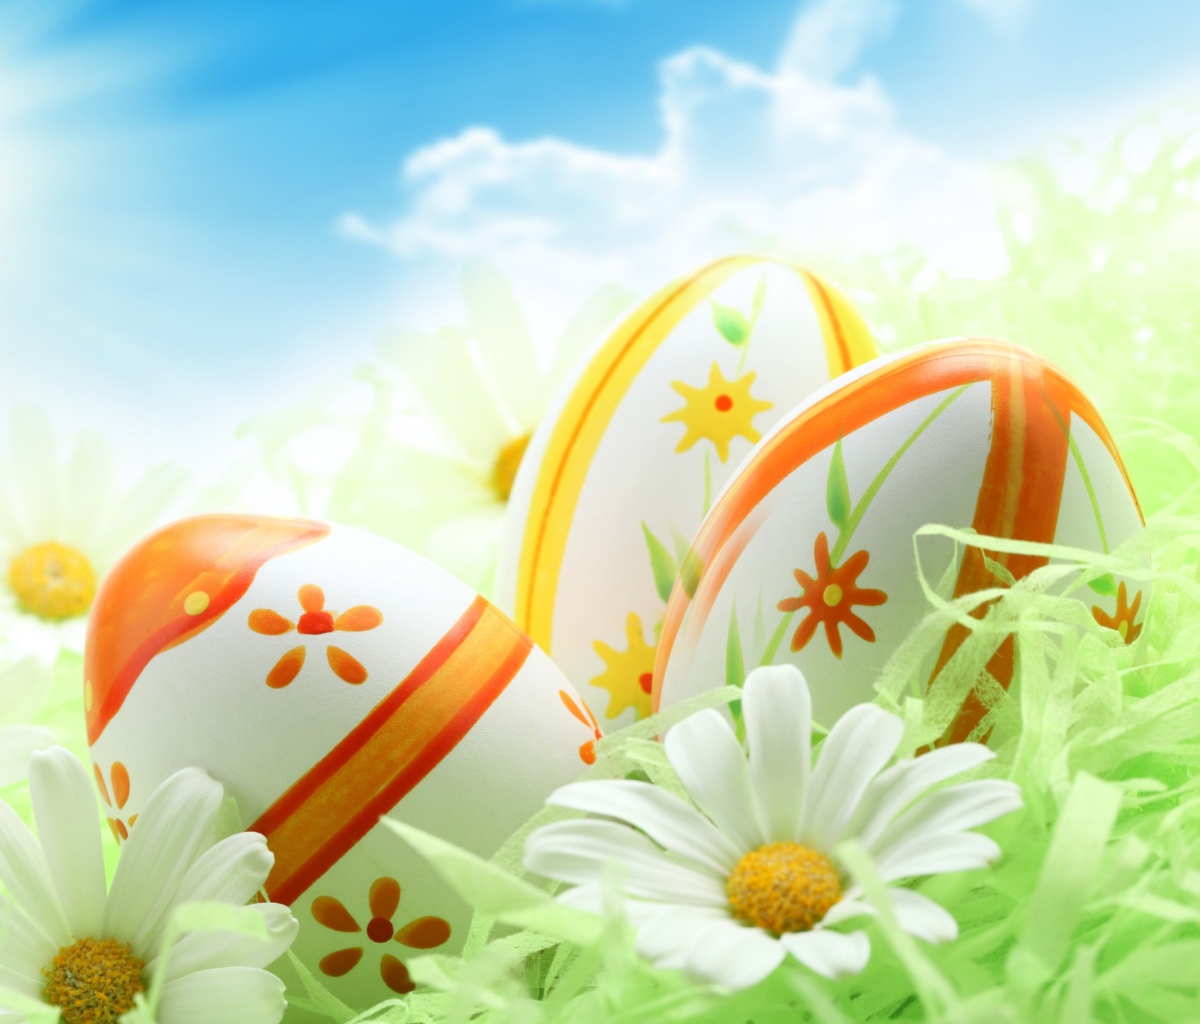 Easter Eggs And Daisies wallpaper 1200x1024